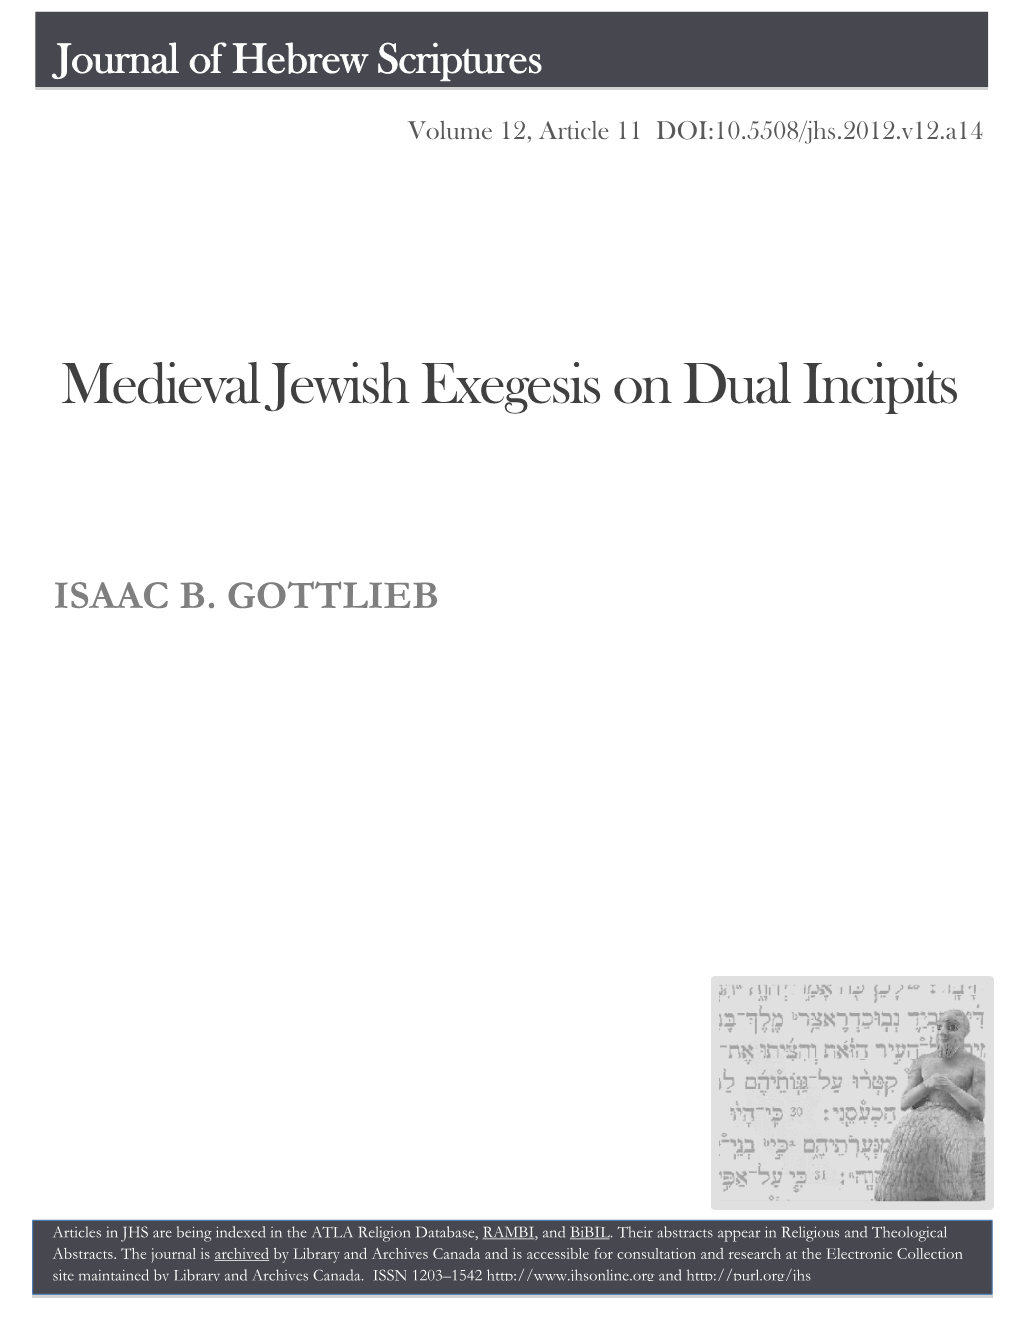 Medieval Jewish Exegesis on Dual Incipits